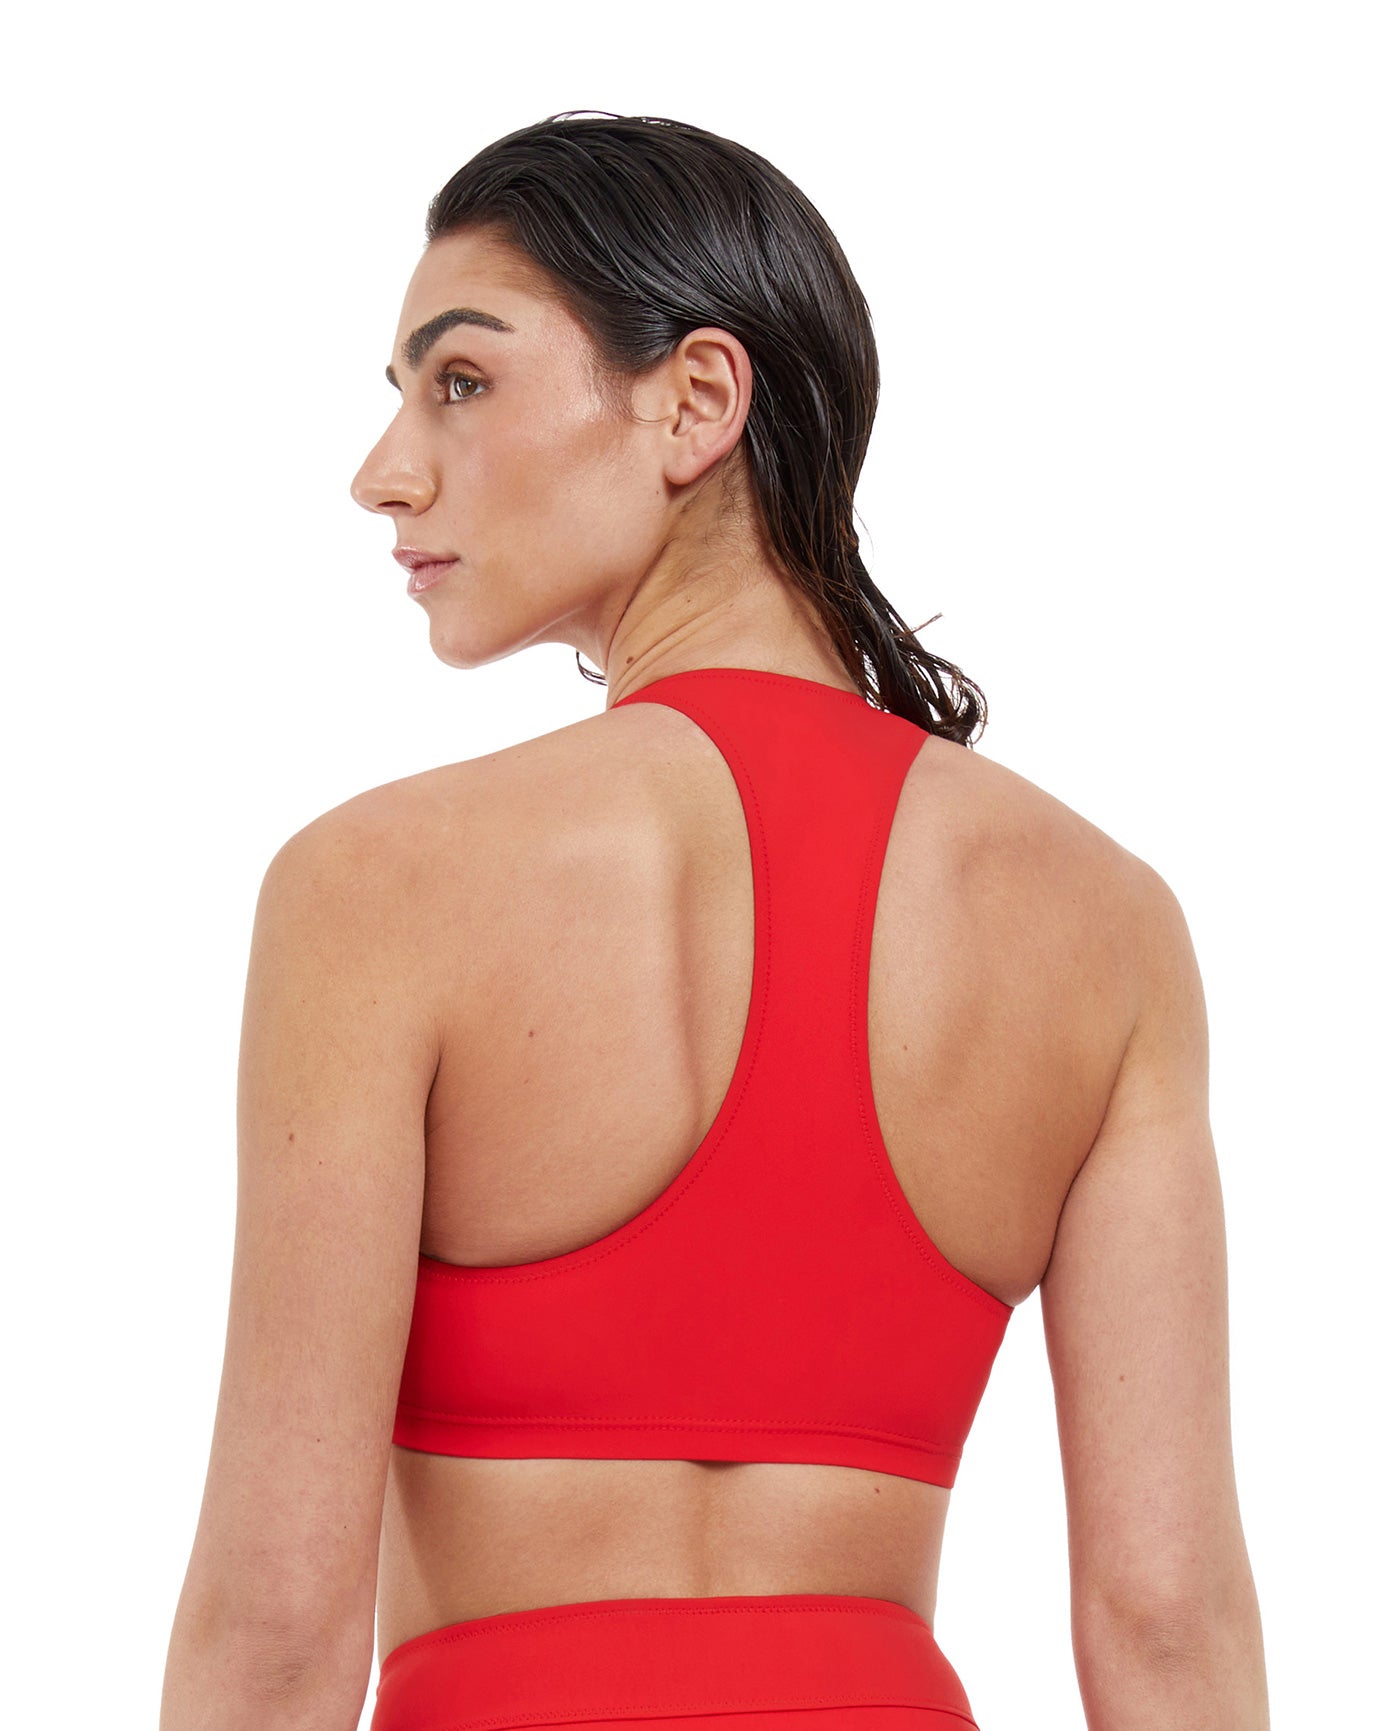 FREE SPORT ULTIMATE WAVE RED